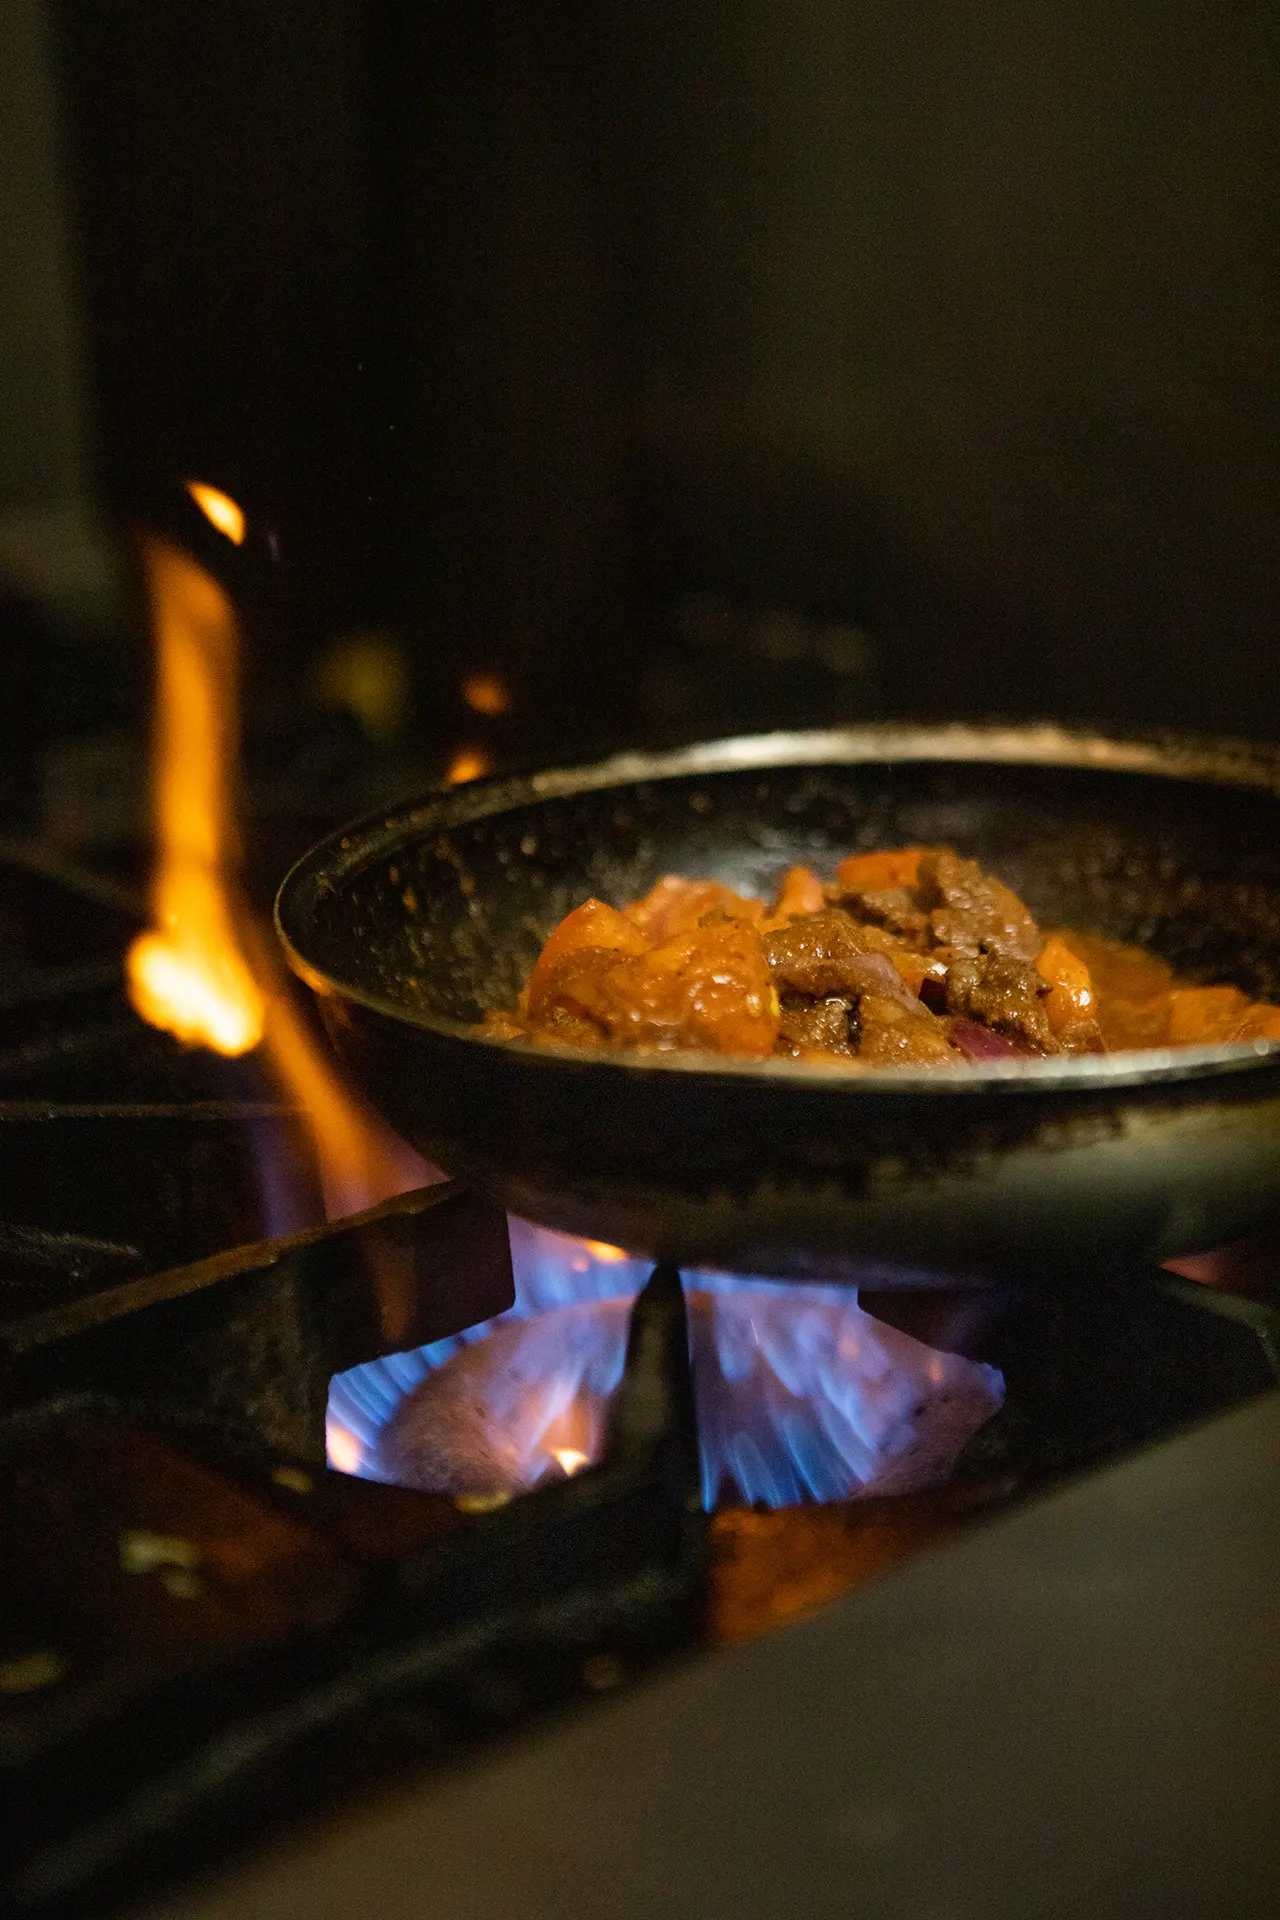 In the hummus labs kitchen beef shawarma is cooking in a sauté pan over the stove top. The flame underneath is blue and purple in color and there are red flames coming up around the back of the sauté pan.